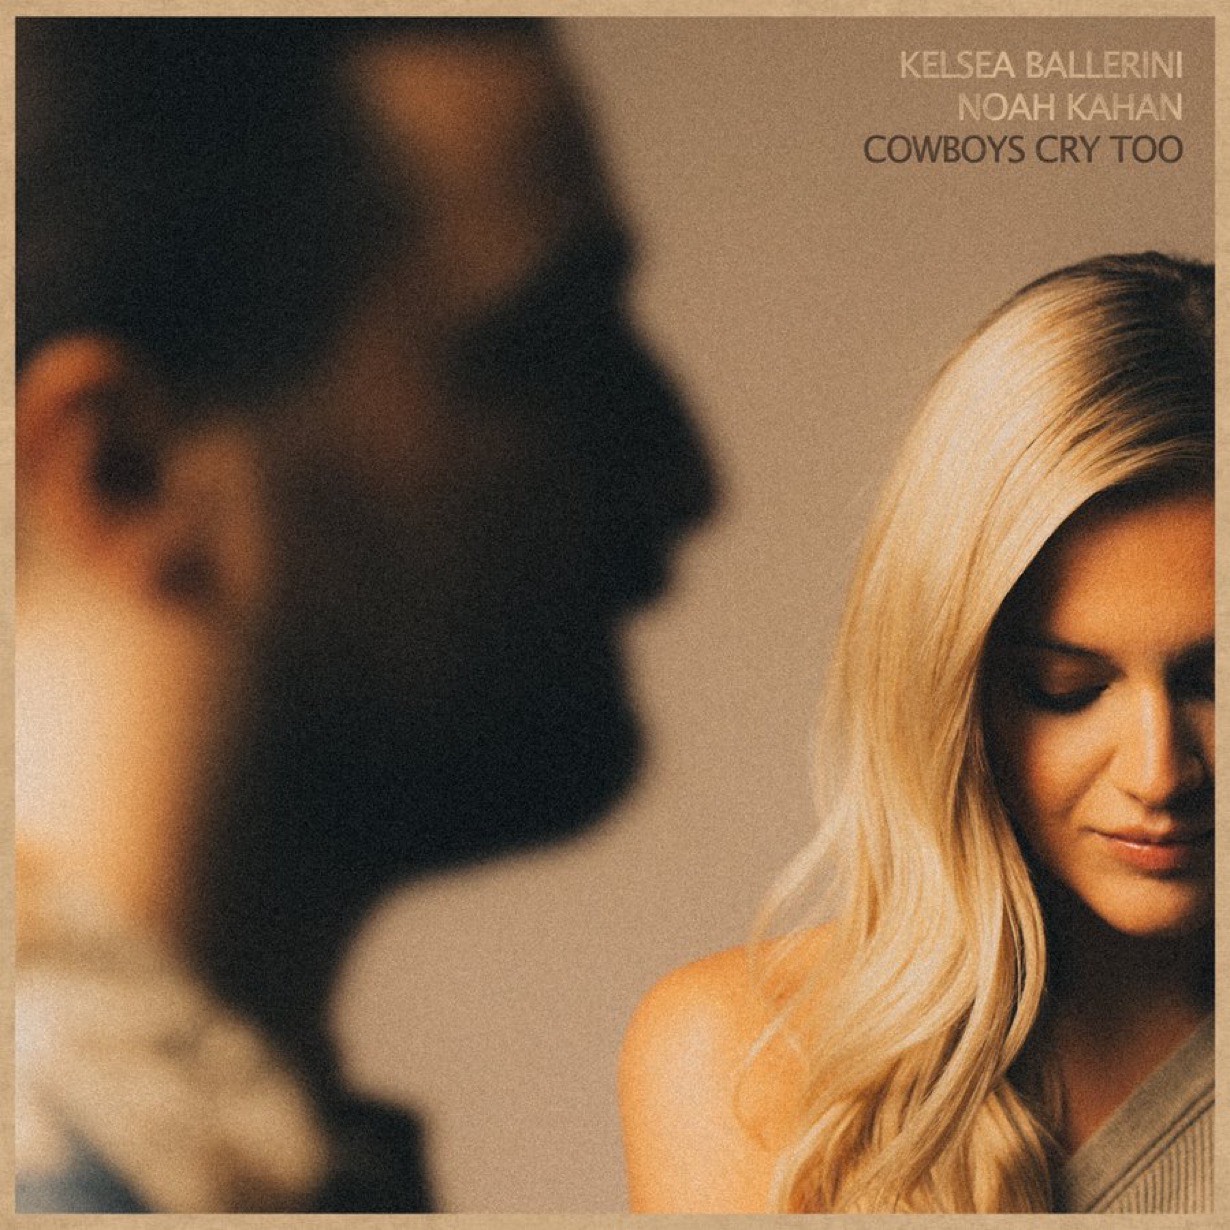 It's official: Kelsea Ballerini announced the release of her new single 'Cowboys Cry Too,' featuring Noah Kahan.